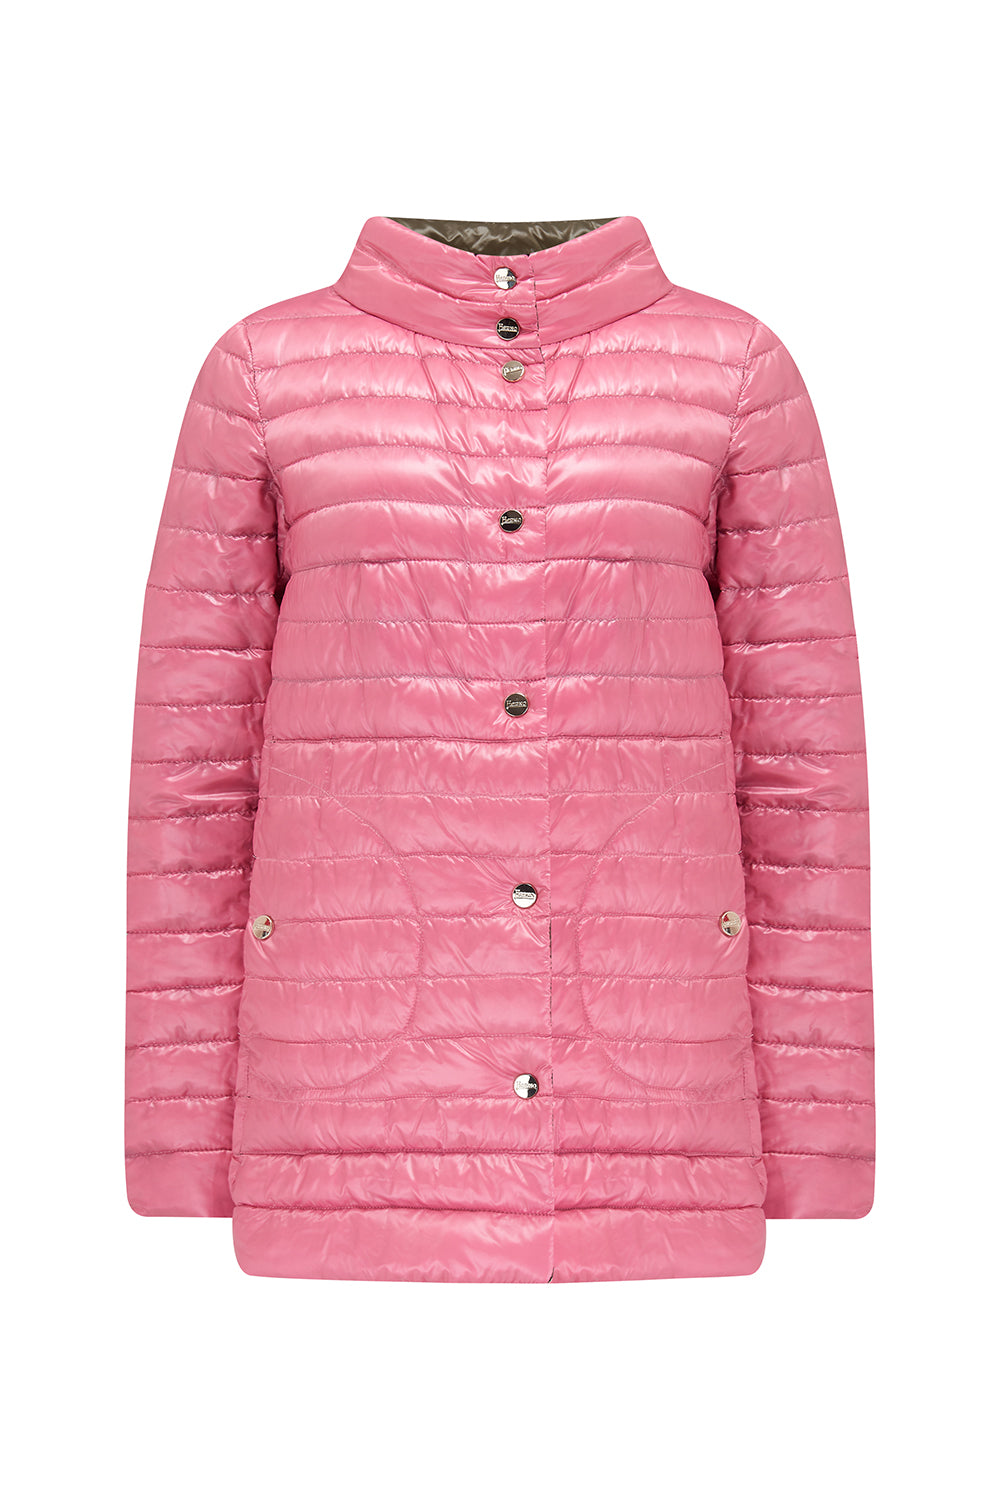 Herno Women’s Reversible Down Jacket Brown / Pink - Front View Pink